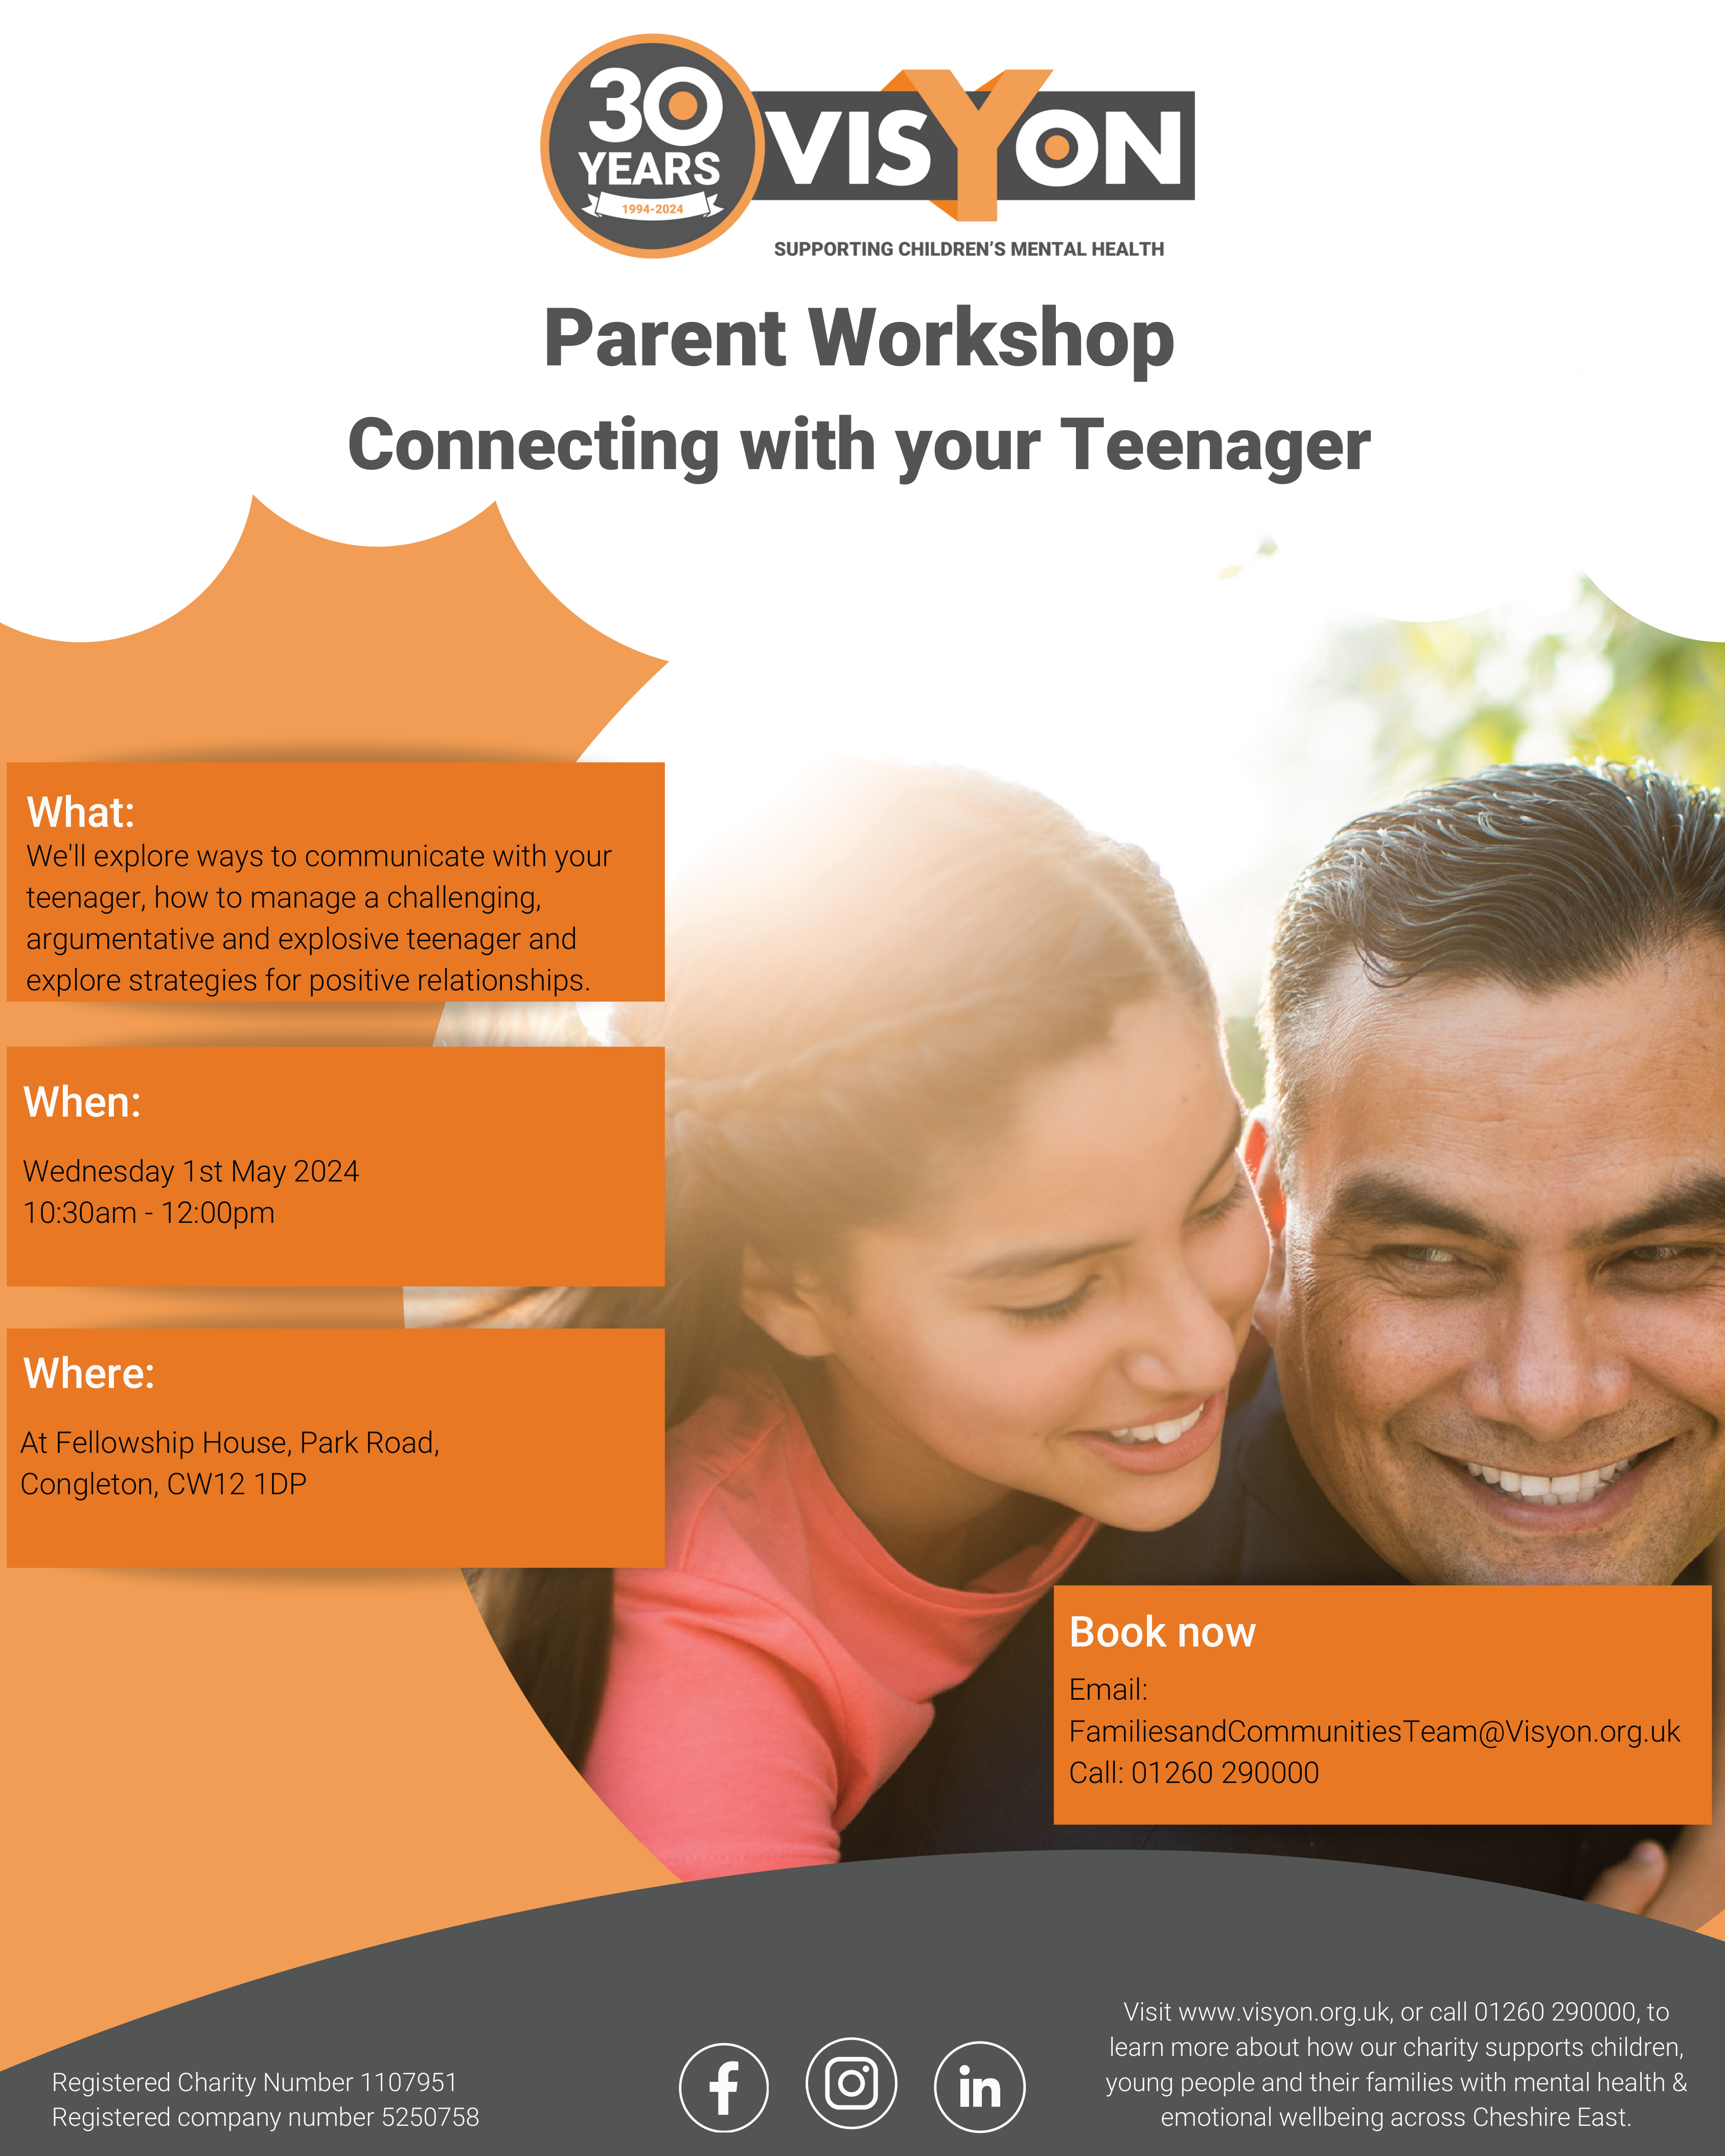 PW - Connecting with your Teenager